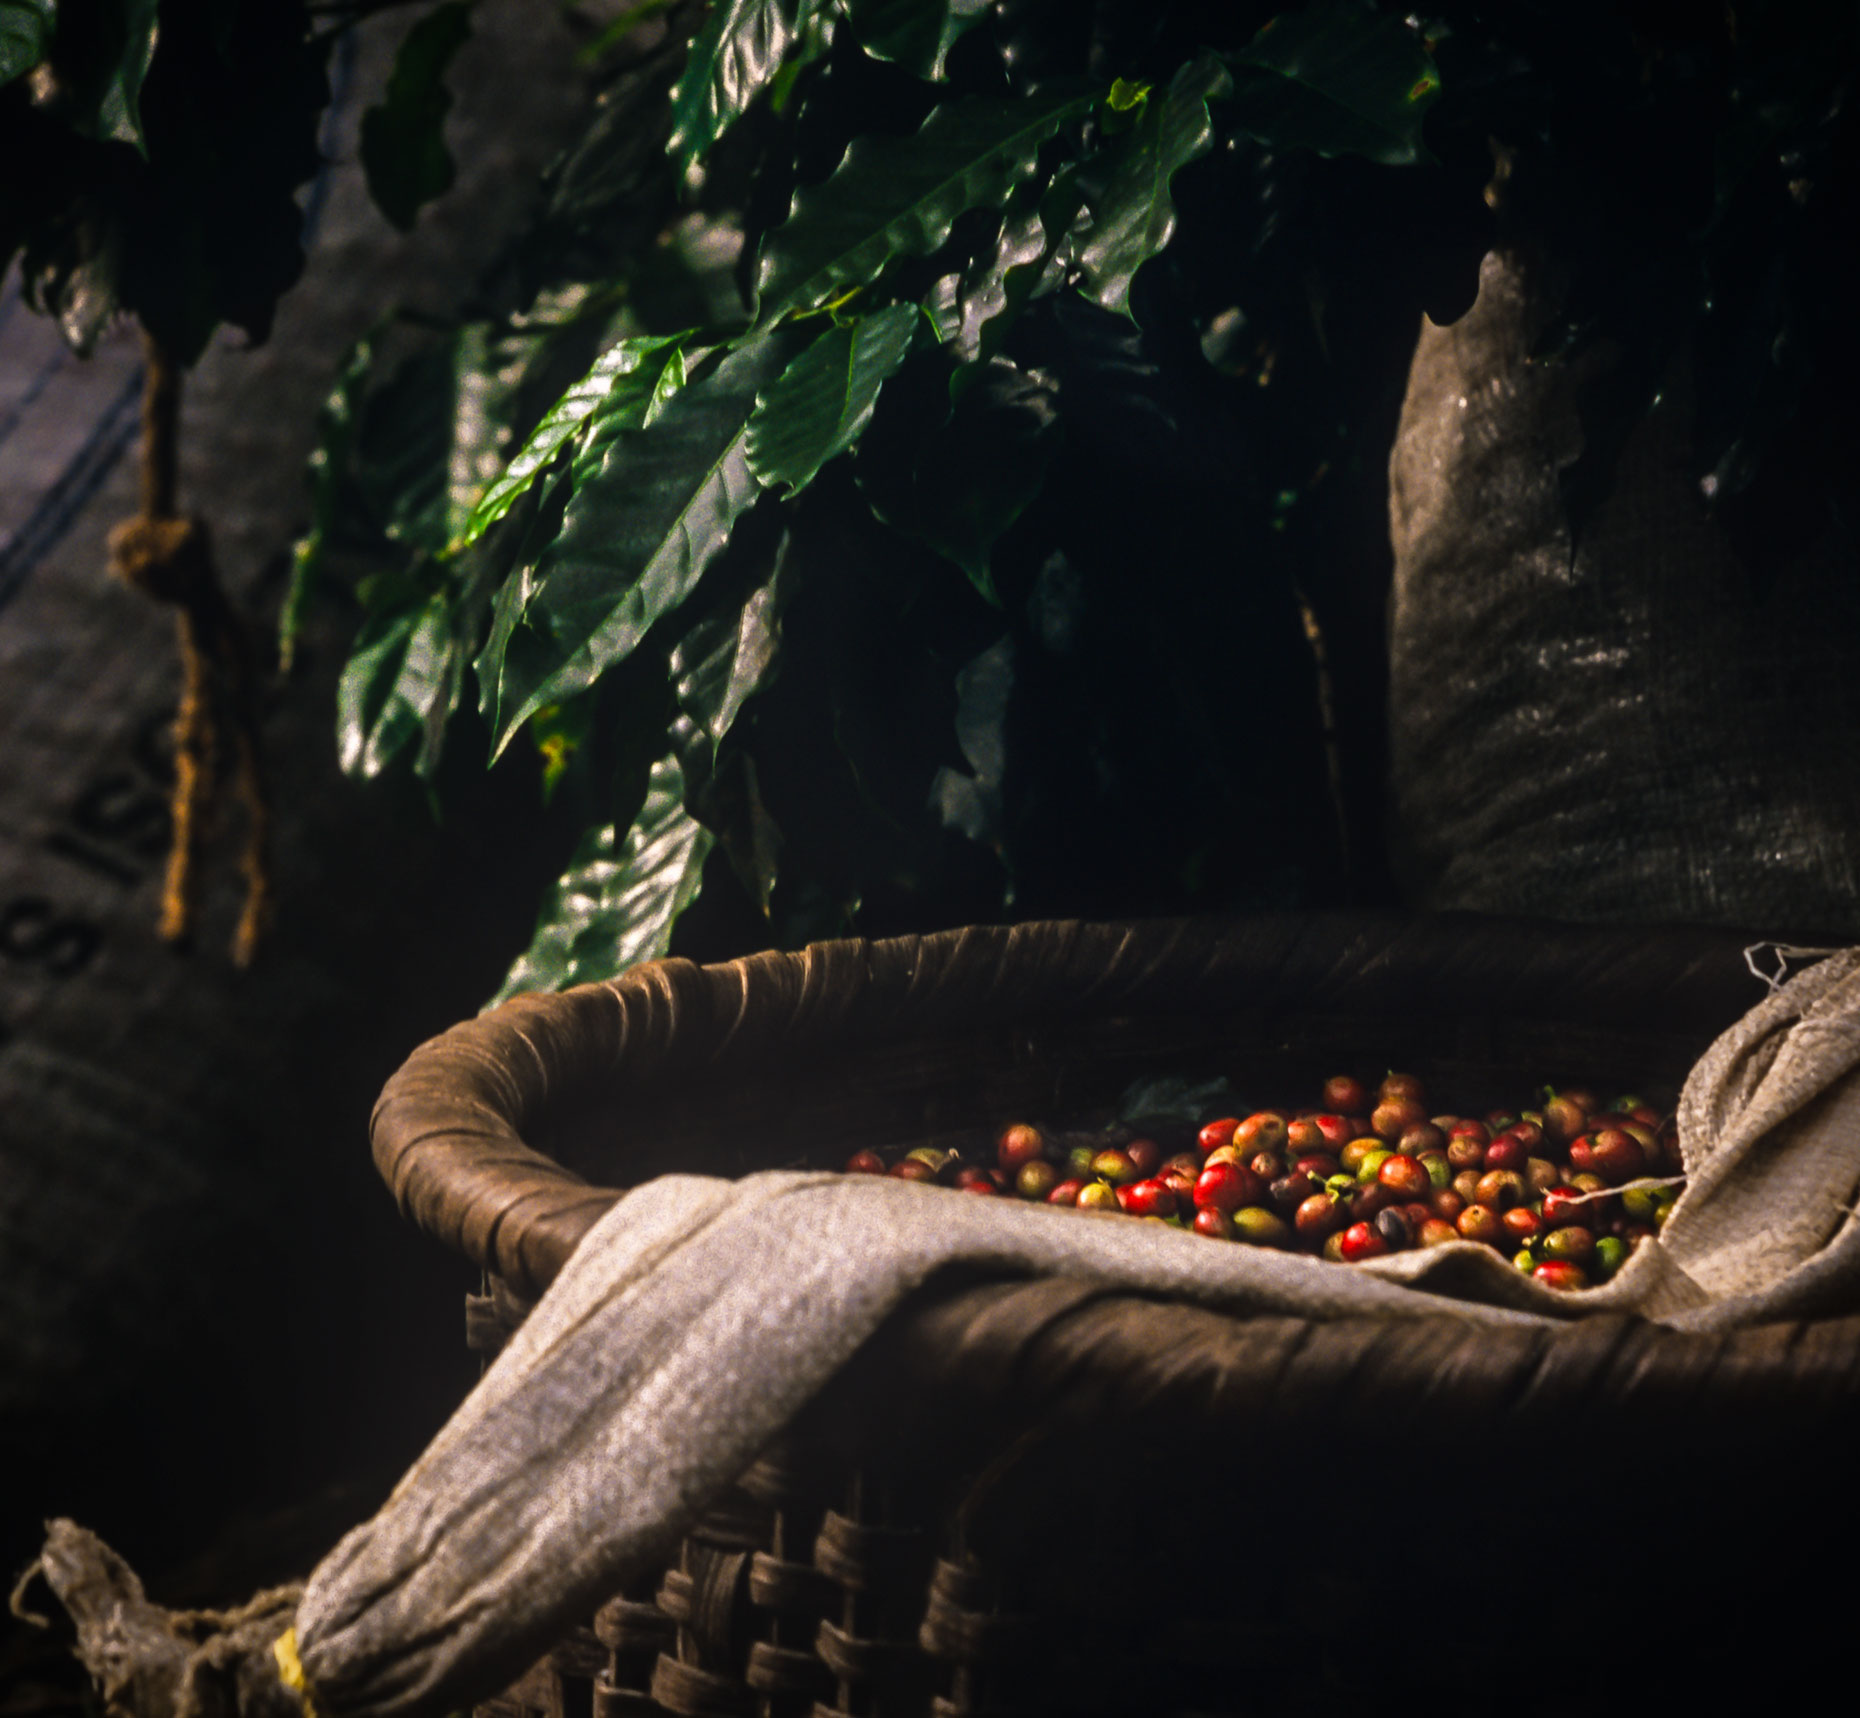 Recently picked coffee cherries in a basket underneath a coffee tree. Agriculture photography